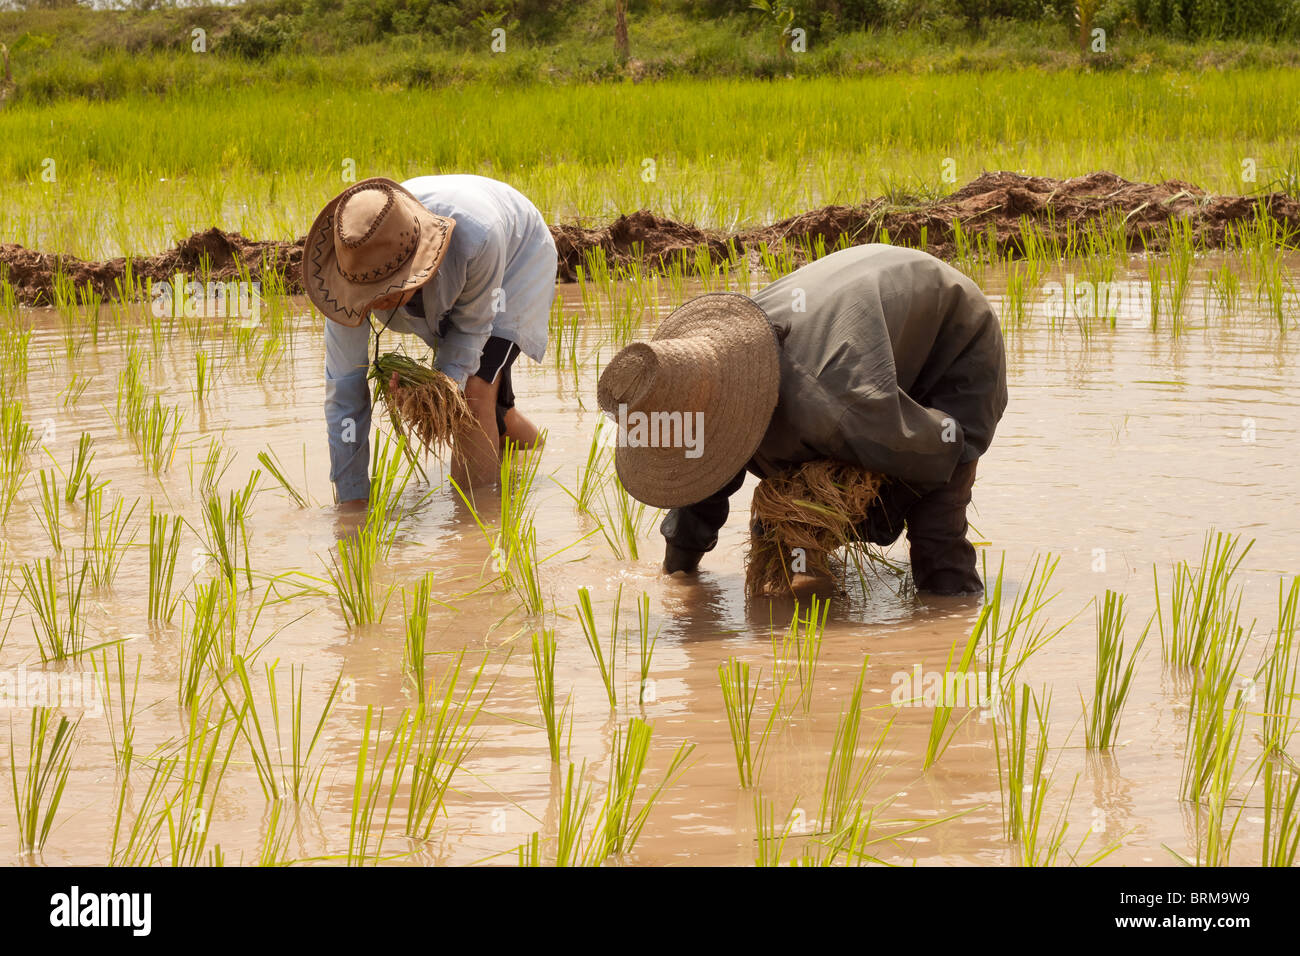 This picture shows a traditional scene in rural Thailand where two local villagers are planting rice. Stock Photo